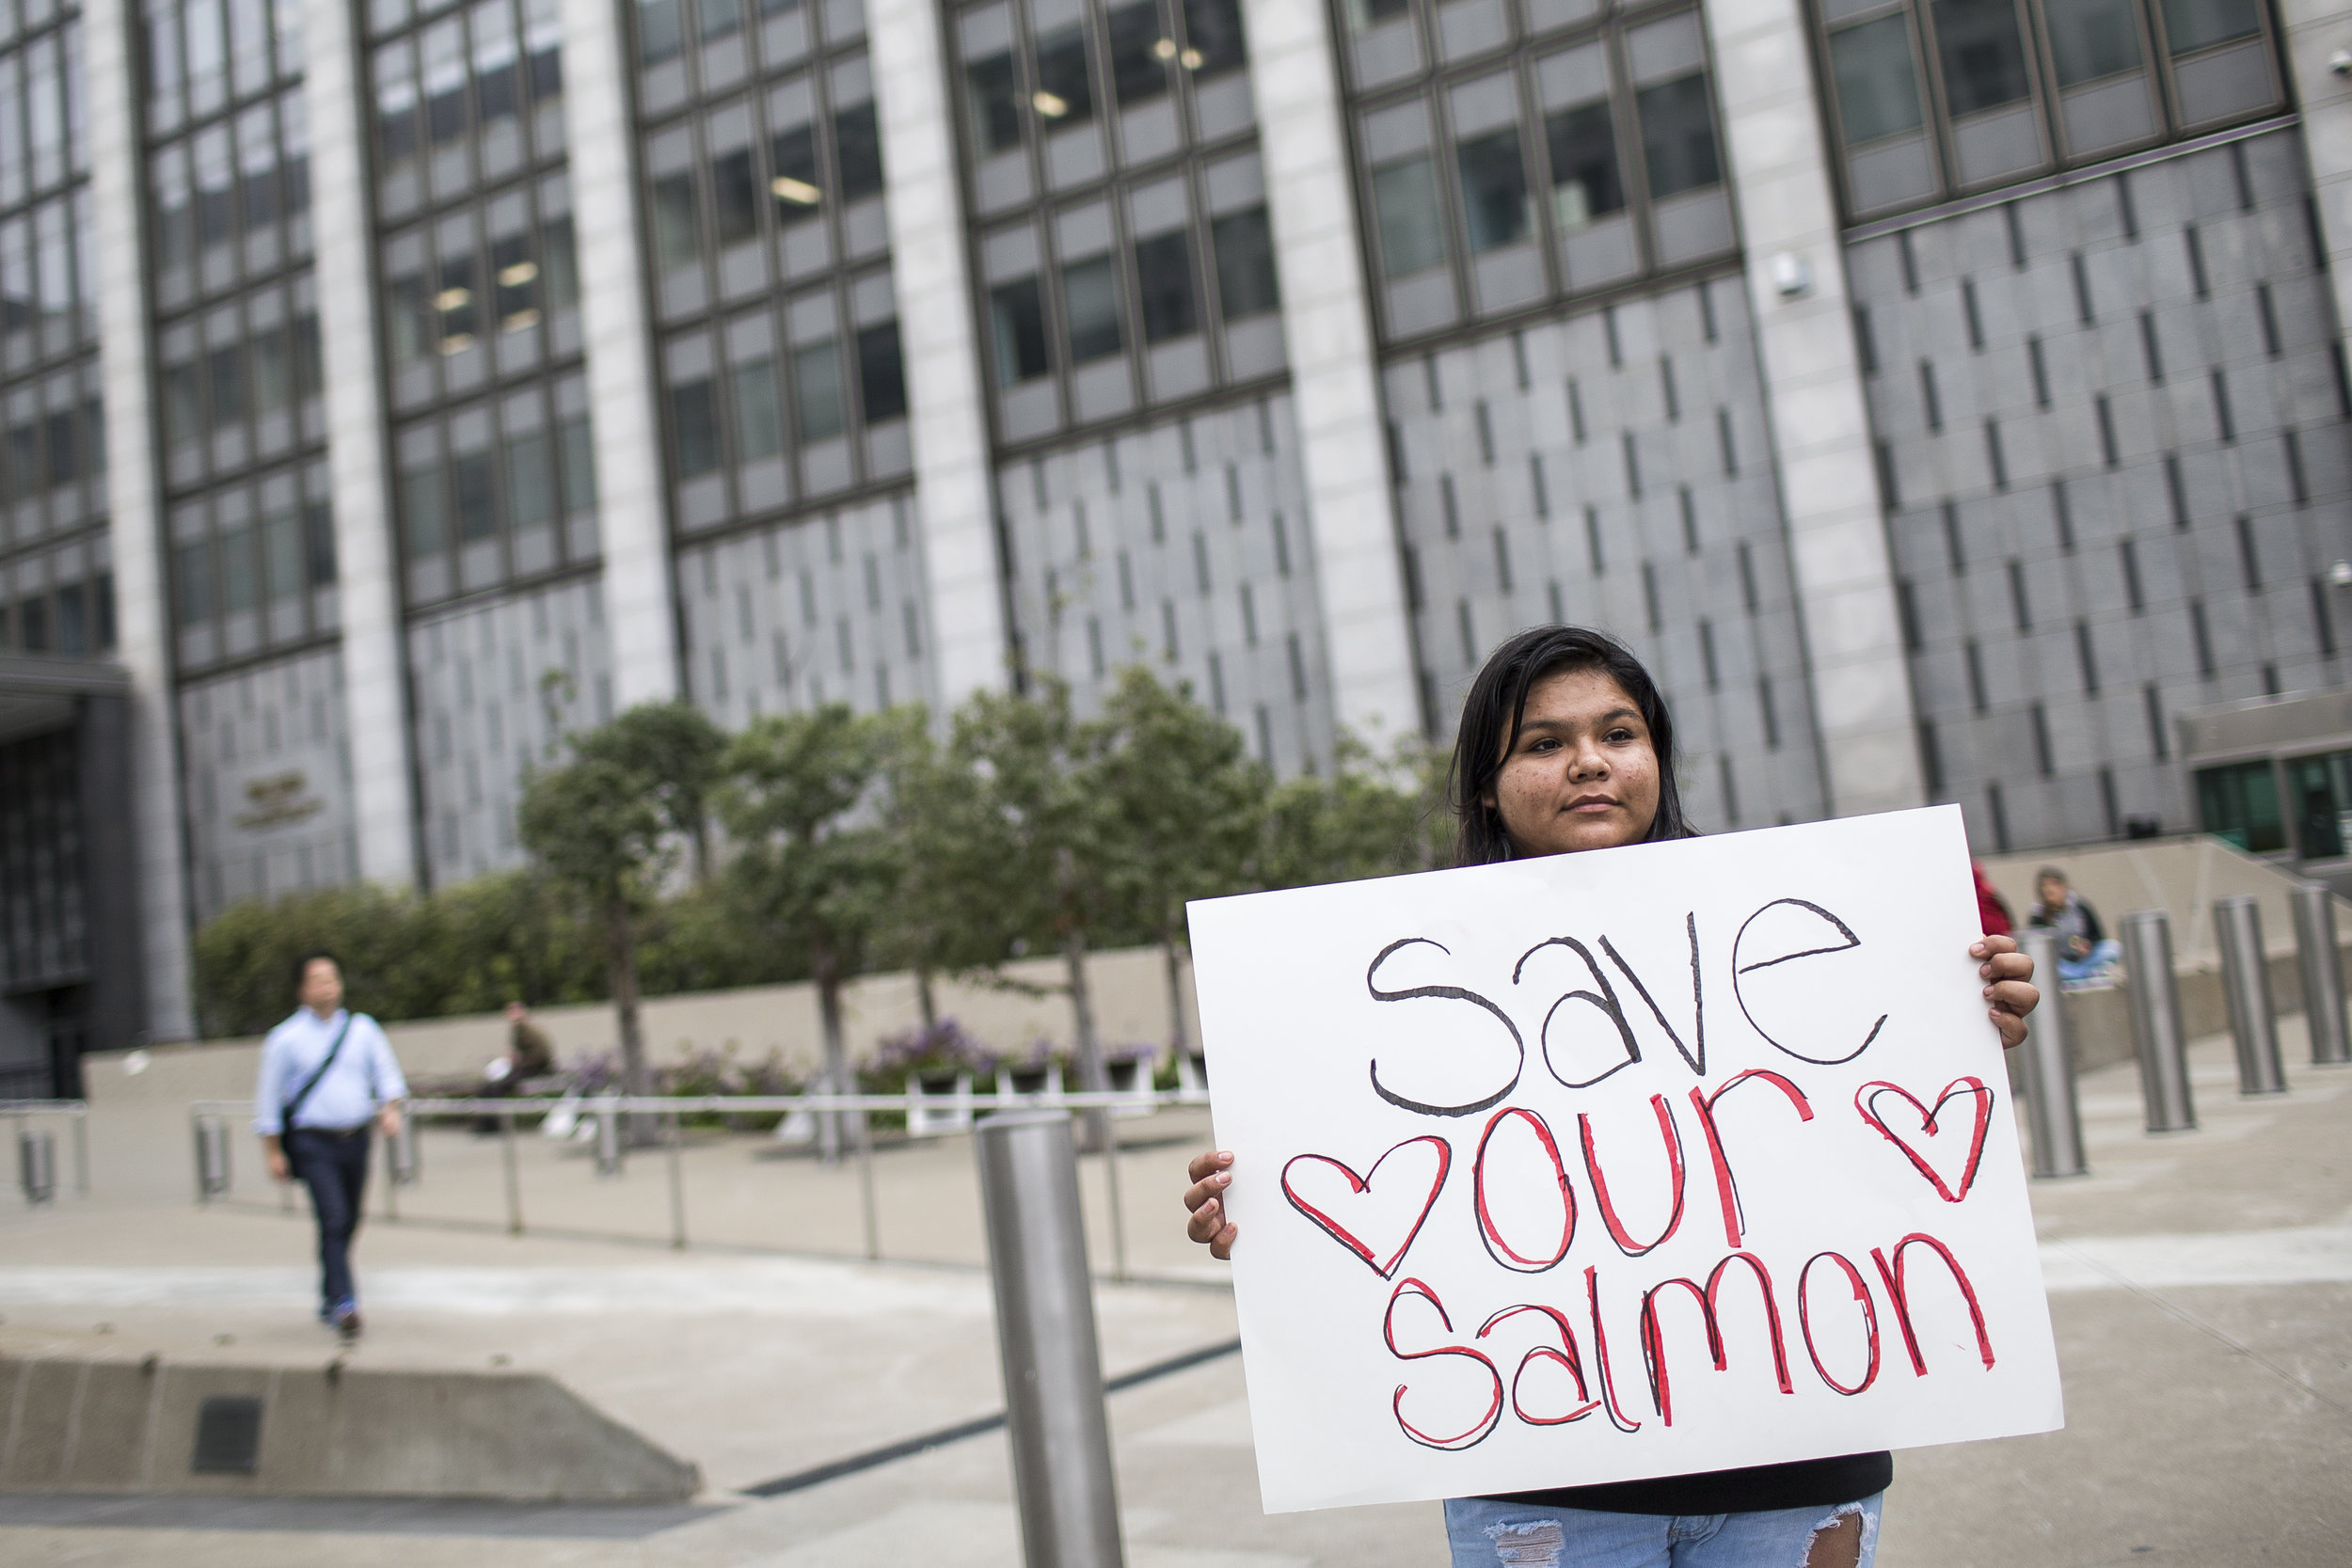  Candace Frank (15) and other Yurok Tribe members protest outside the Burton Federal Building in San Francisco on Apr. 10, 2018. Martin do Nascimento / Earthjustice  